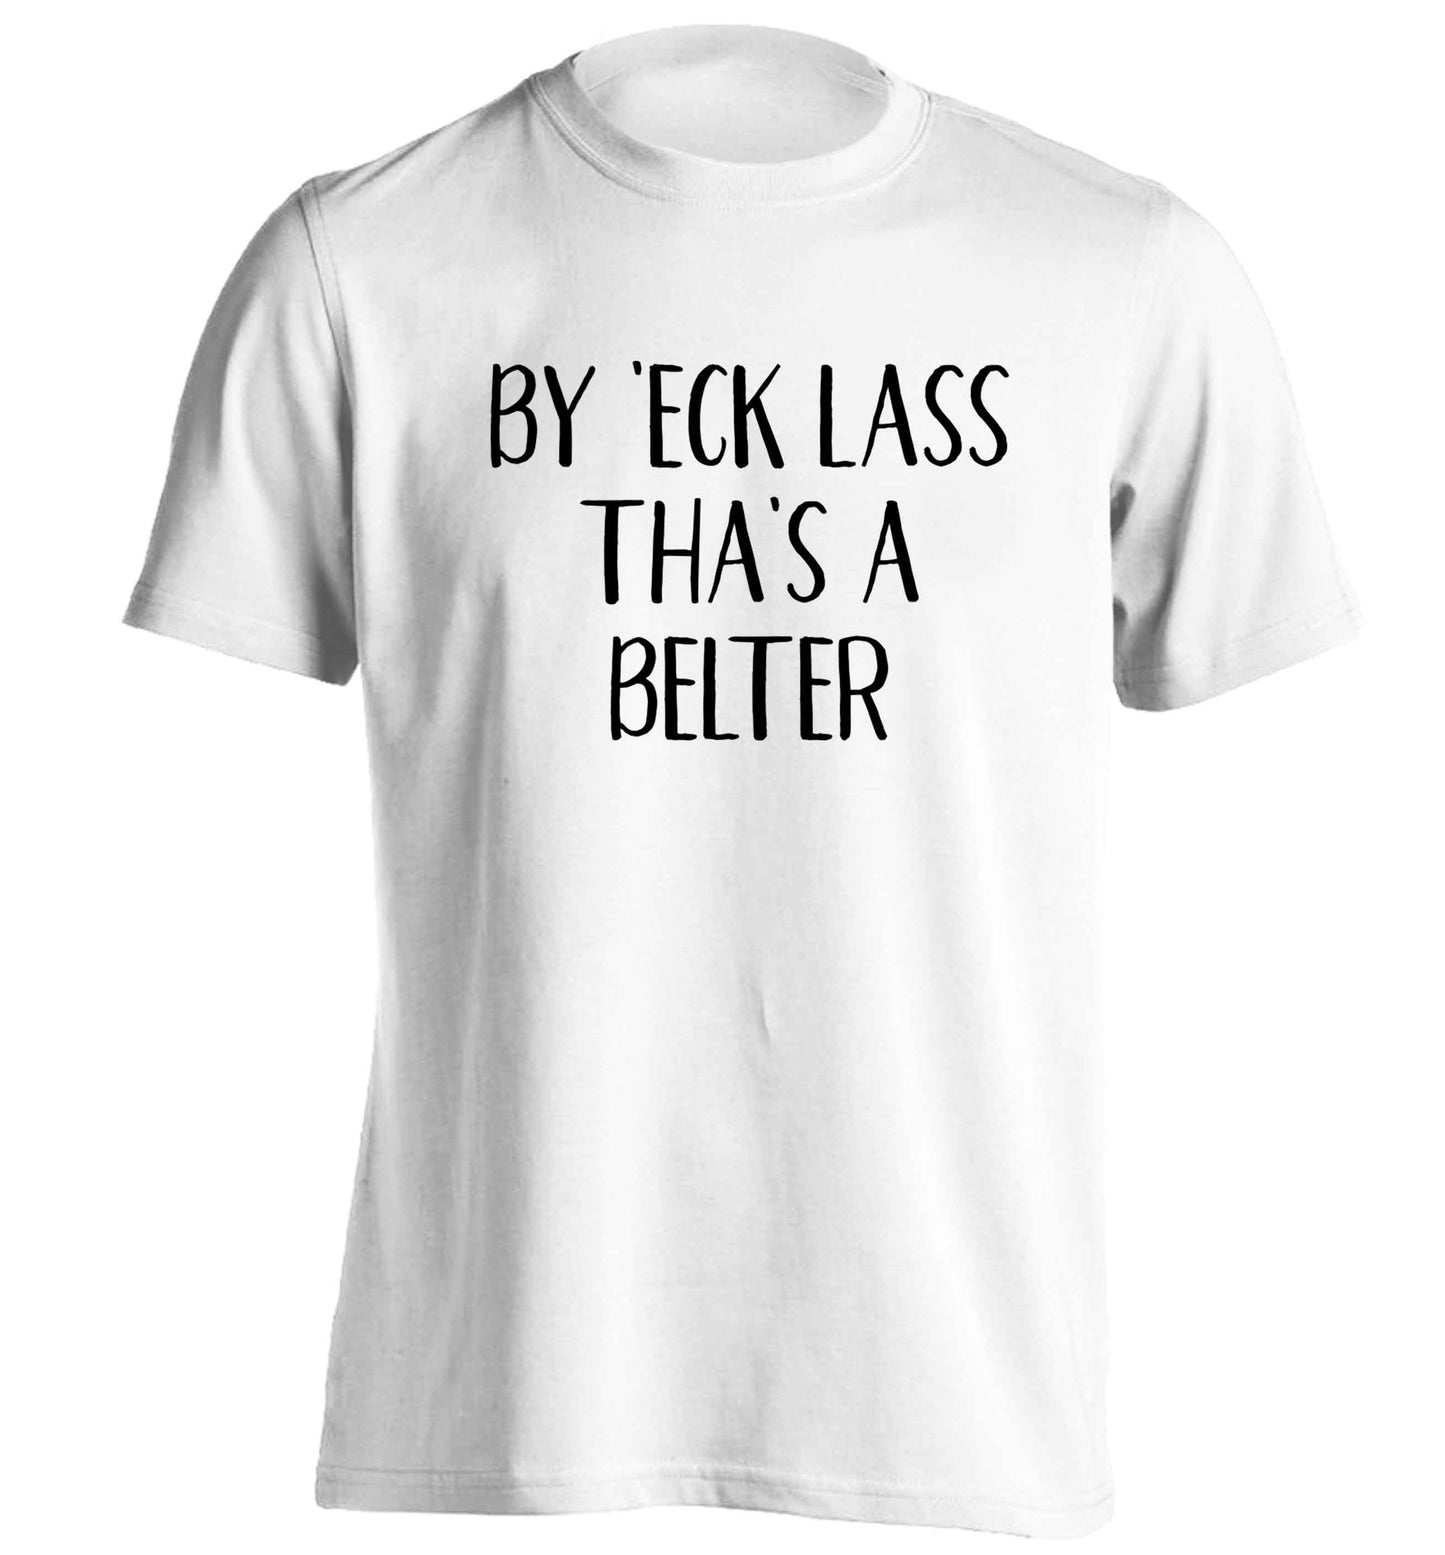 Be 'eck lass tha's a belter adults unisex white Tshirt 2XL